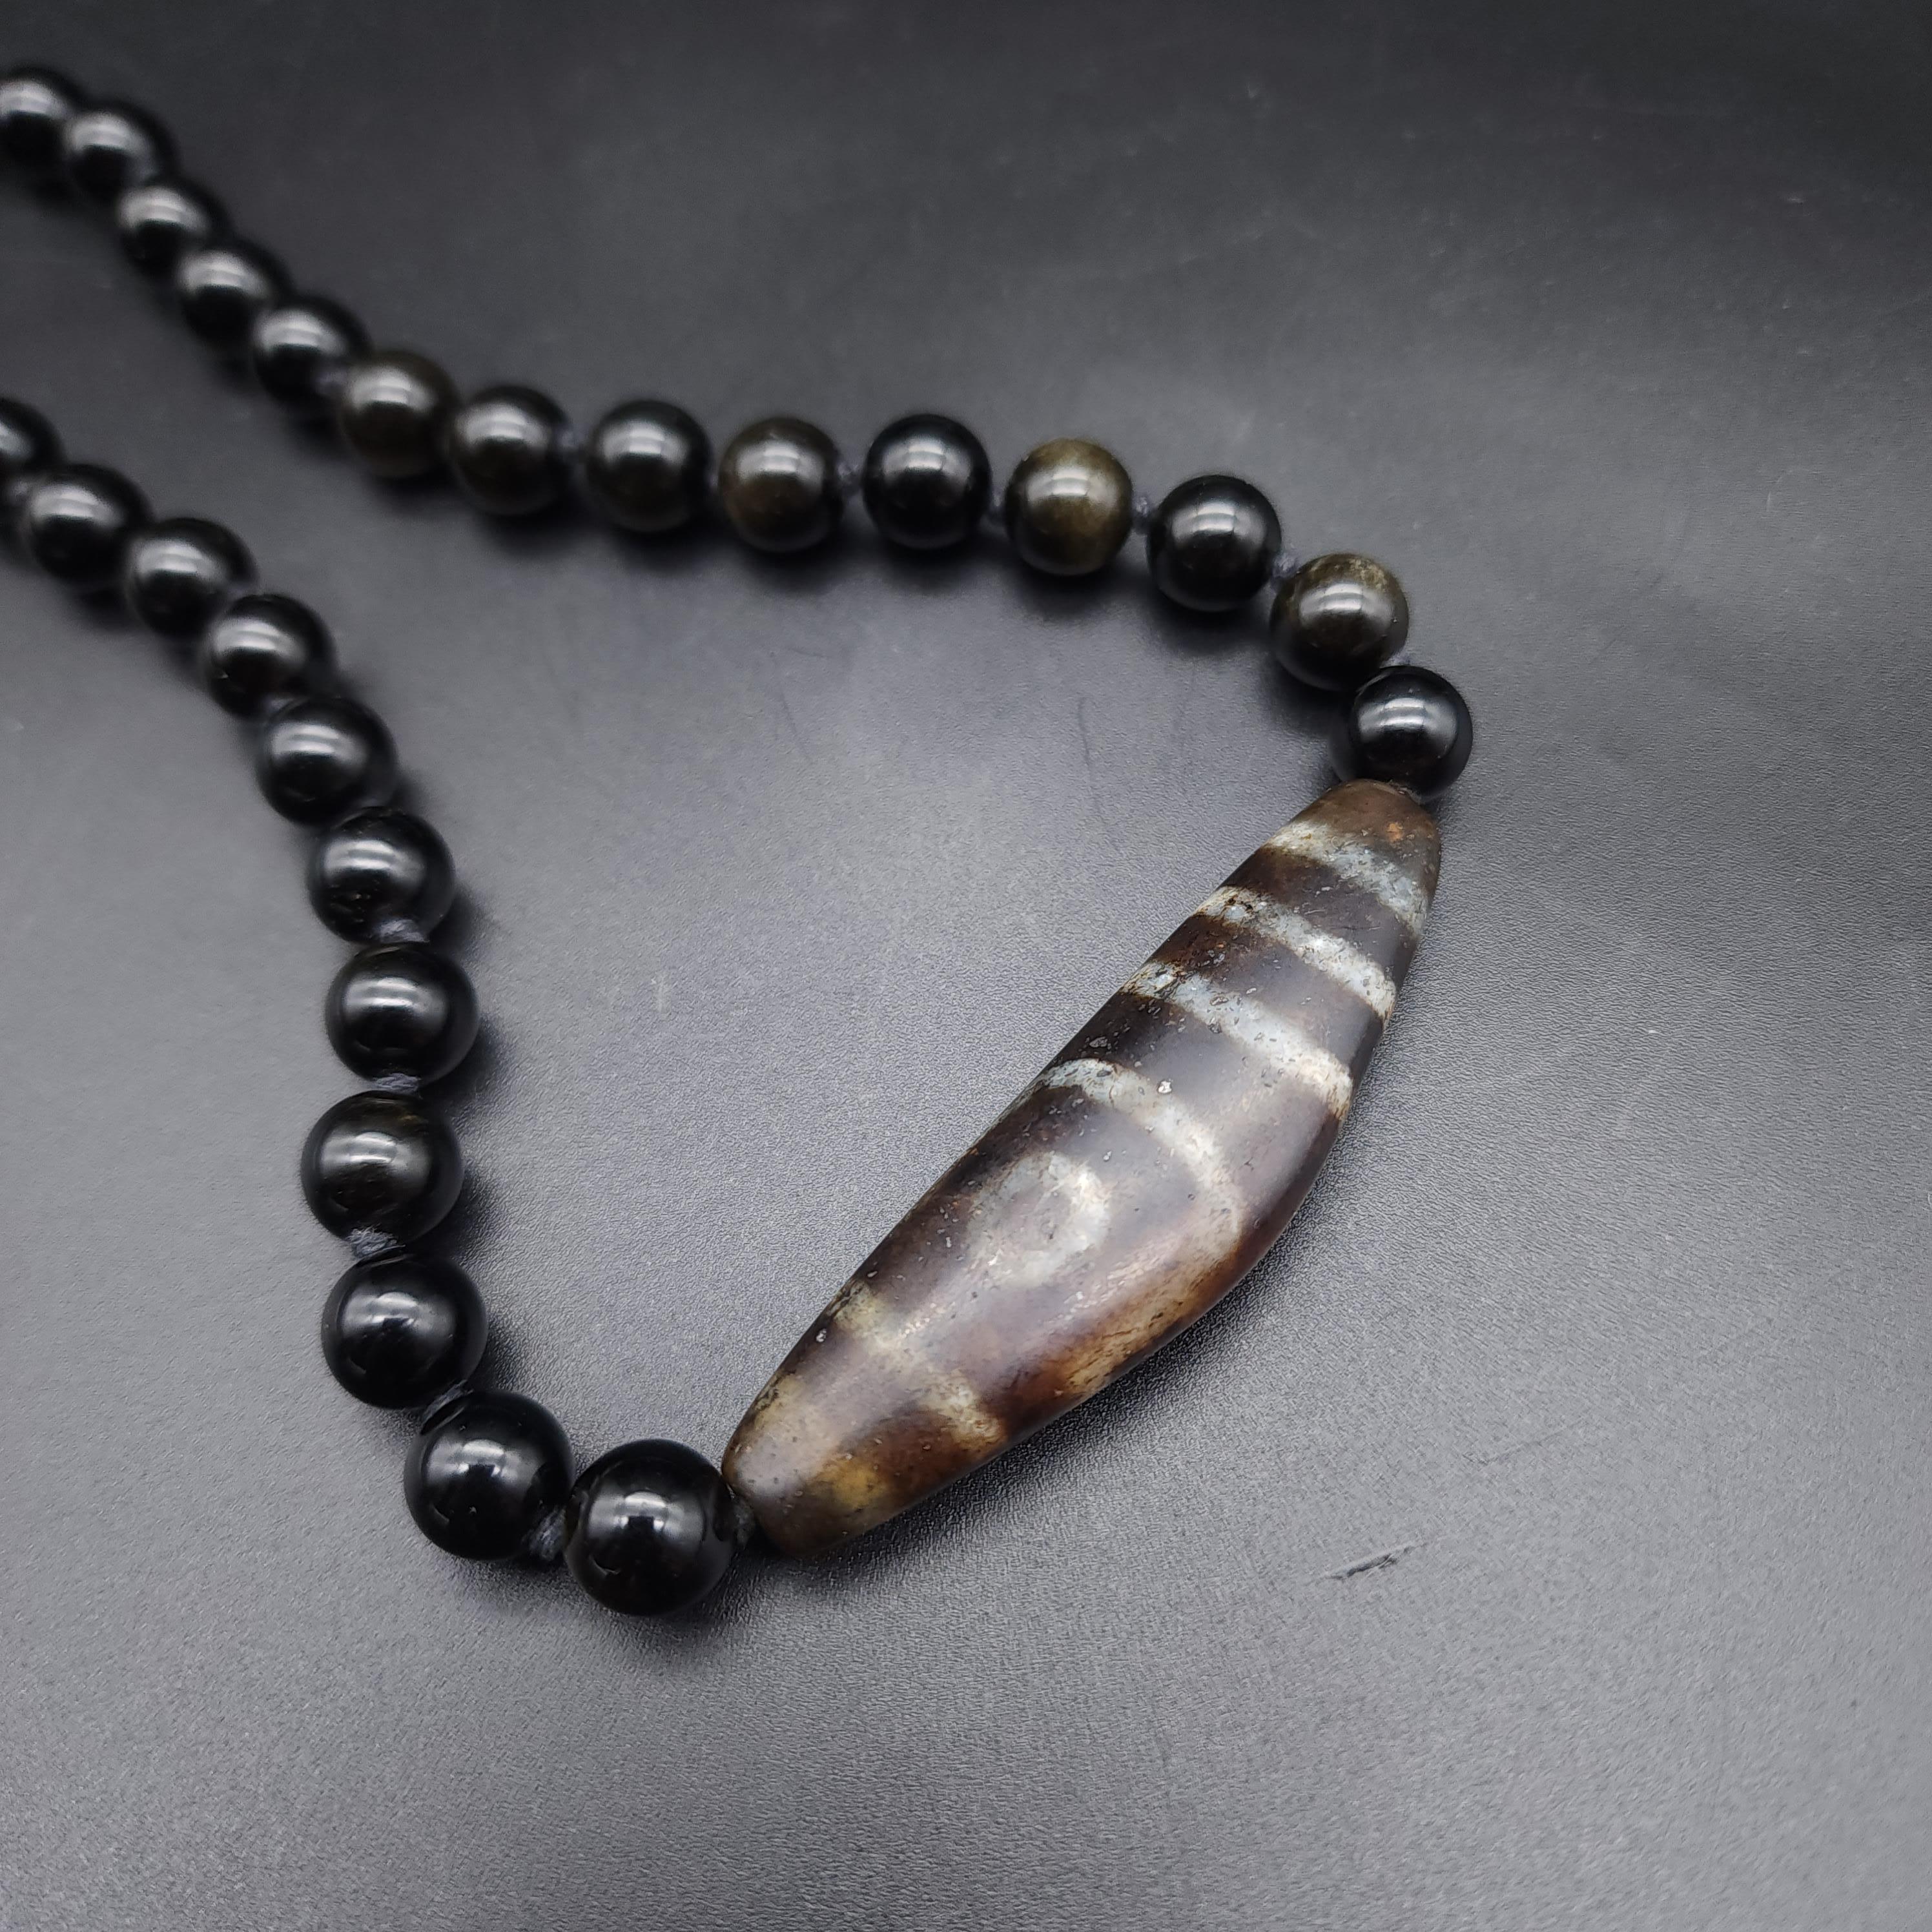 Retro Dzi Pendant Centerpiece, Obsidian Beads Knotted Necklace  Sterling Silver Clasp For Sale